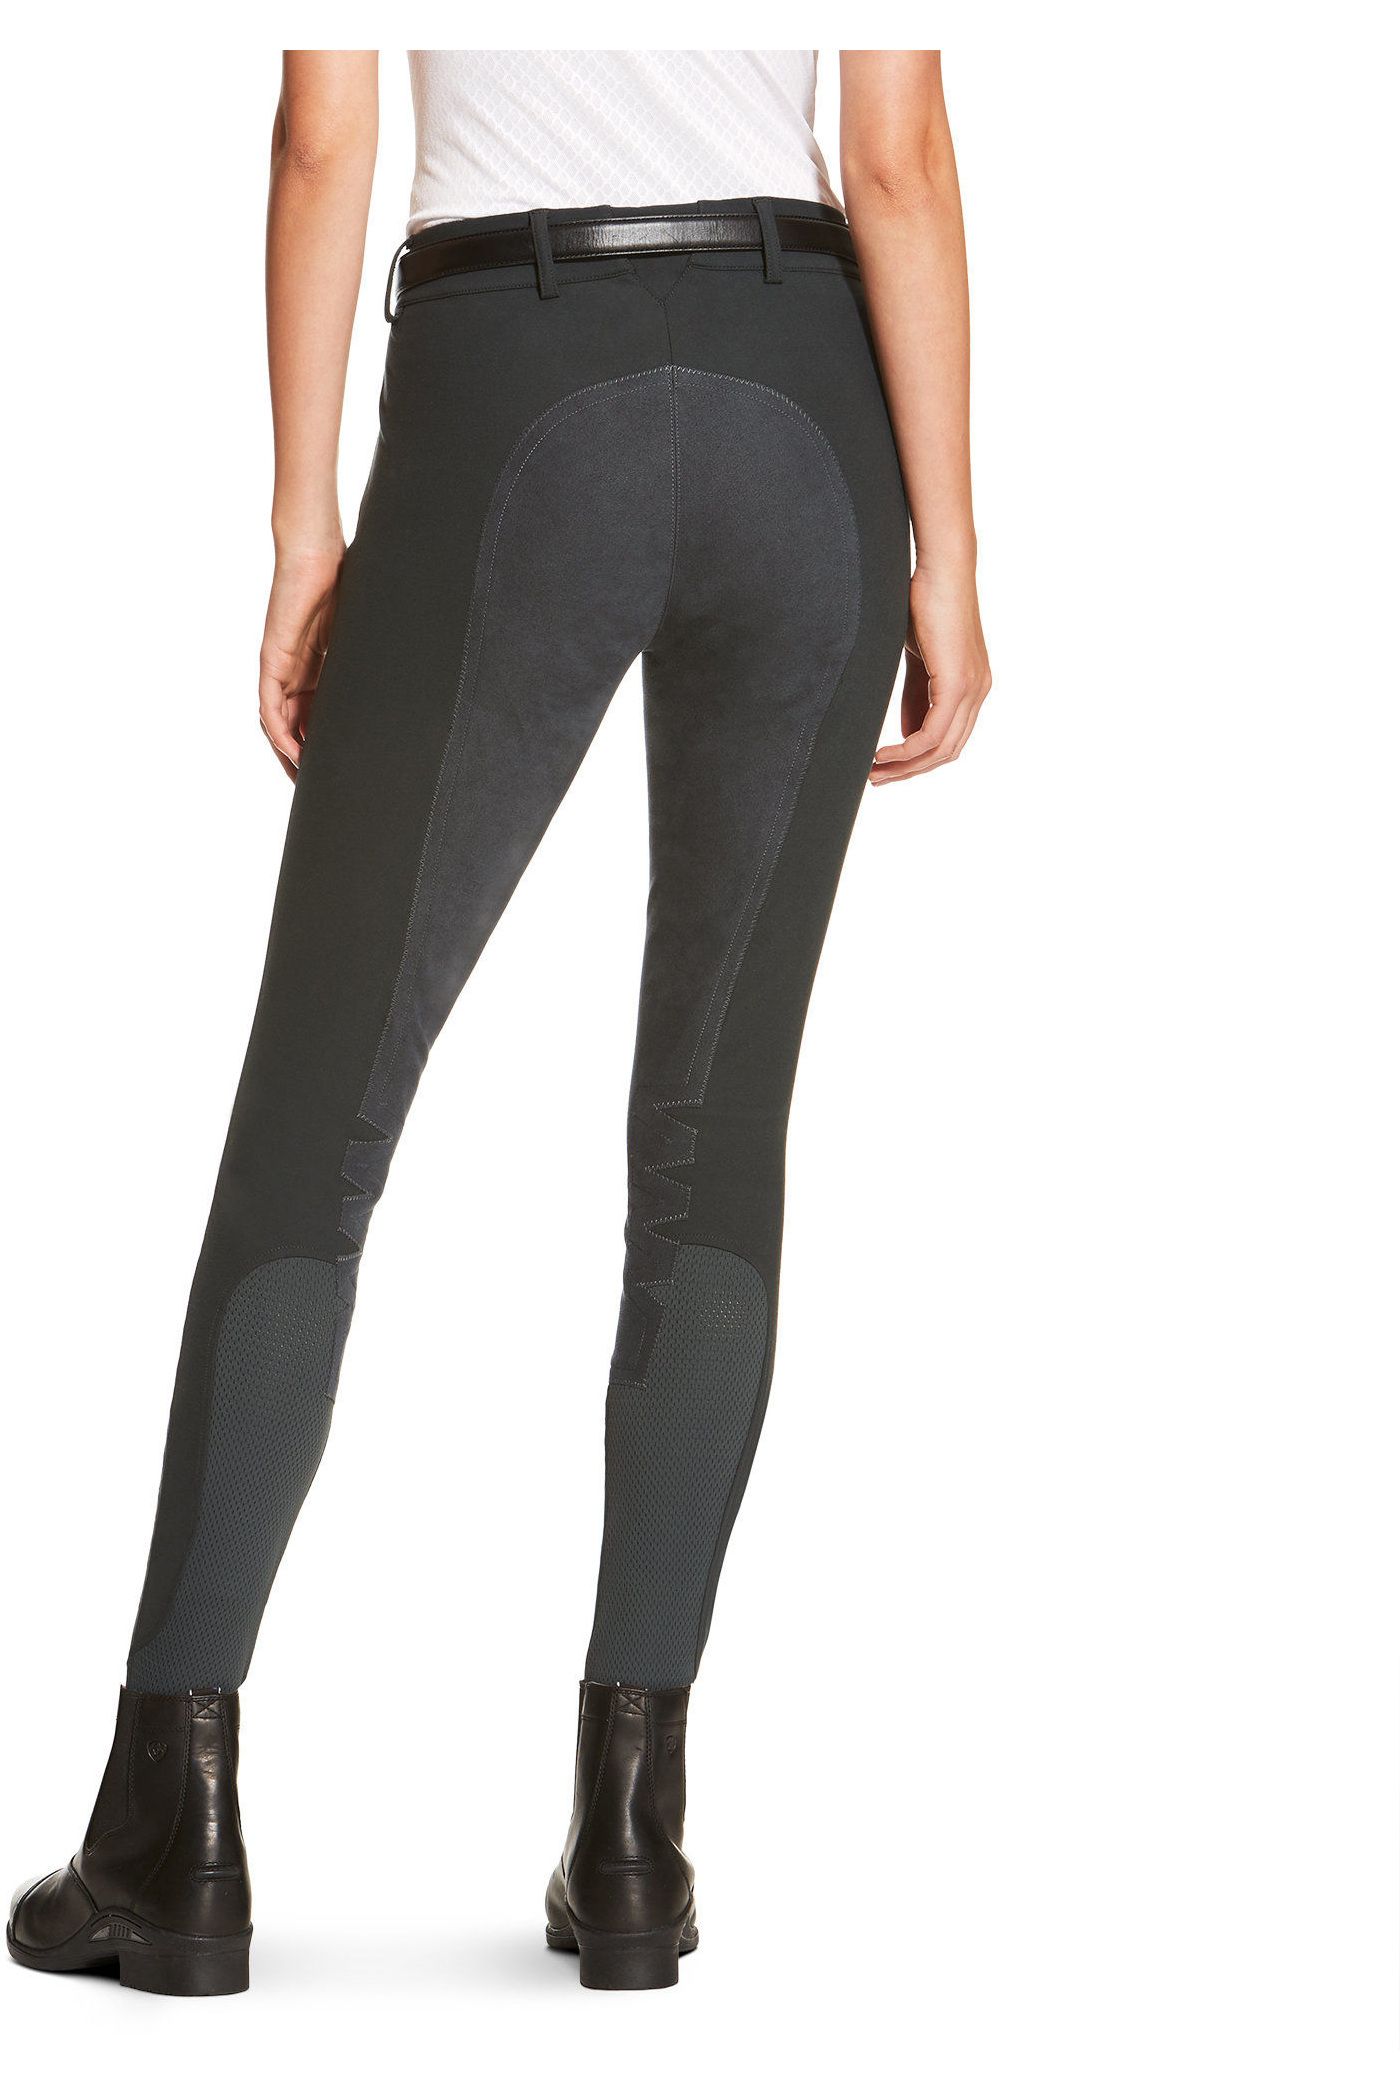 Ariat Womens Heritage Elite Full Seat Breeches | The Drill Shed | The ...